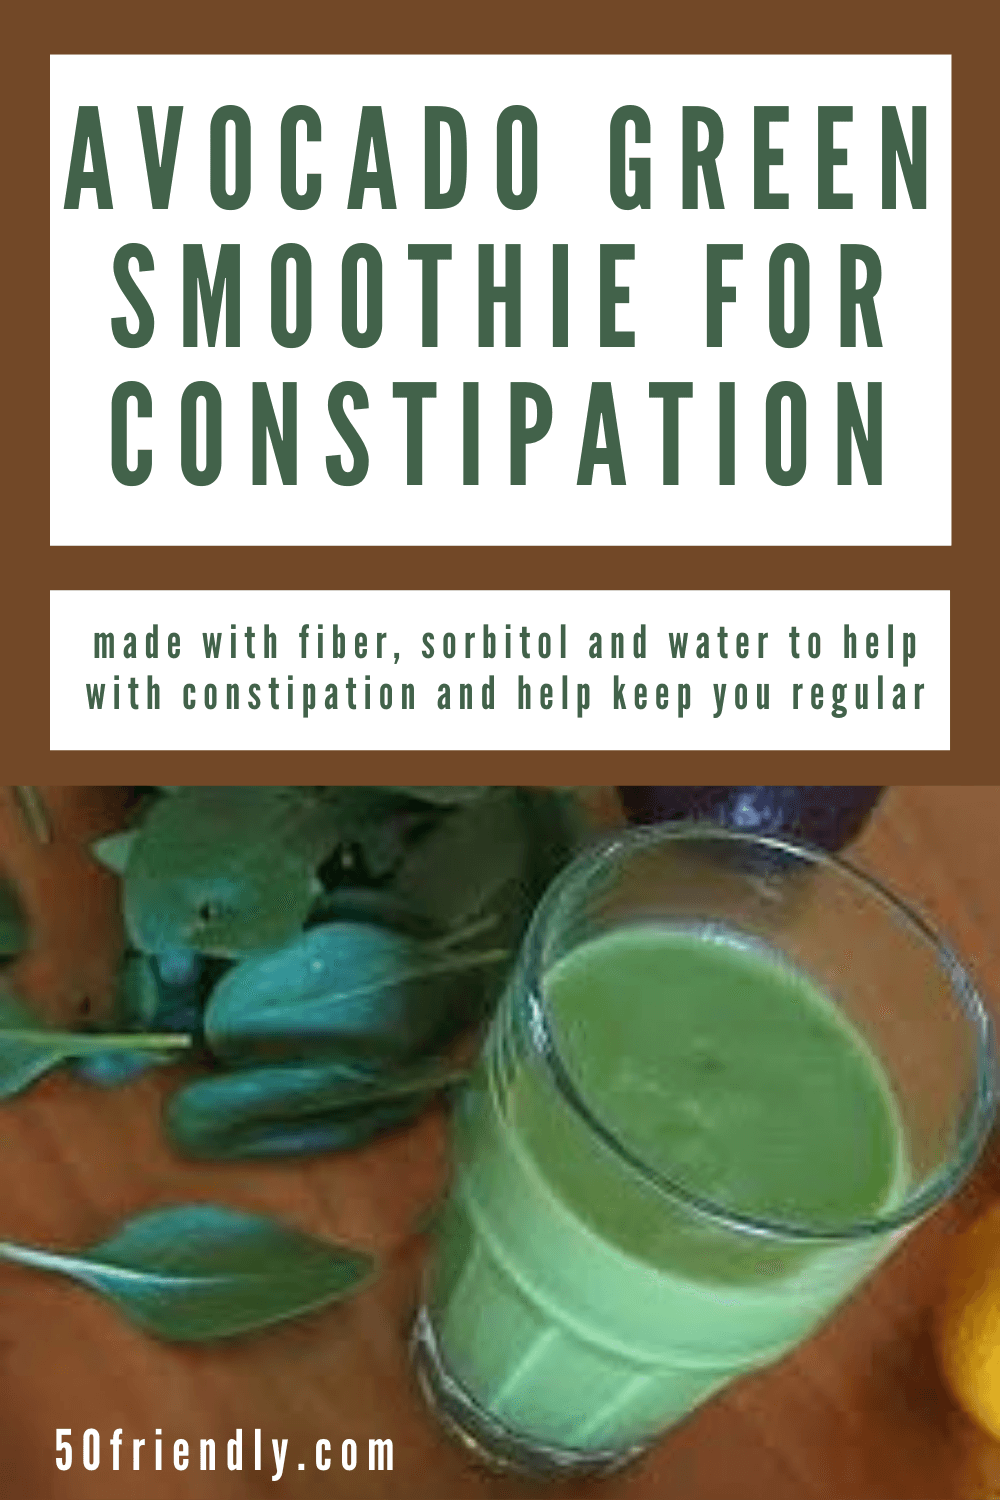 AVOCADO GREEN SMOOTHIE TO HELP WITH CONSTIPATION - 50 Friendly